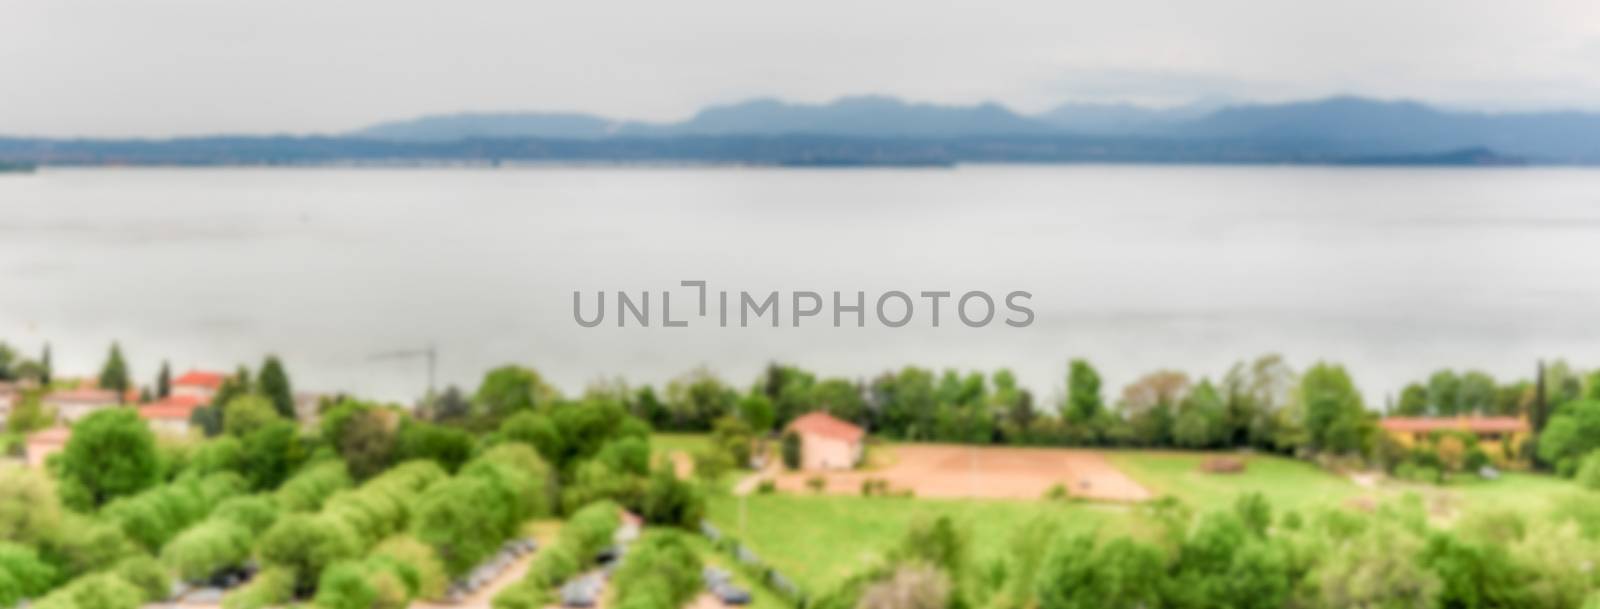 Defocused background with aerial view of Lake Garda, Italy by marcorubino